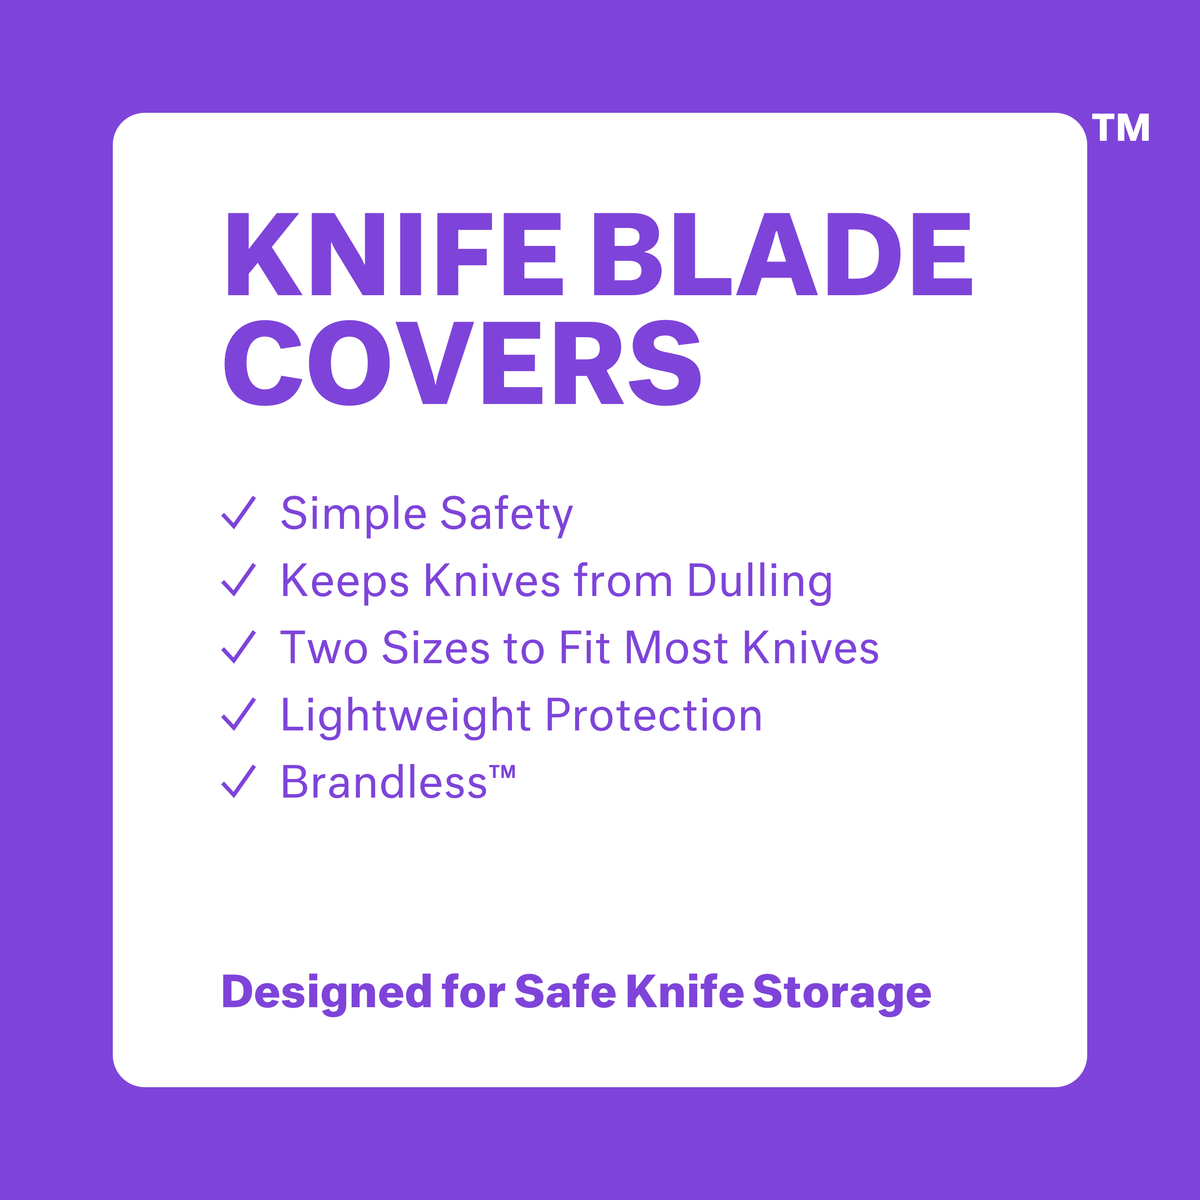 Knife blade covers: simple safety, keeps knives from dulling, two sizes to fit most knives, lightweight protection, brandless